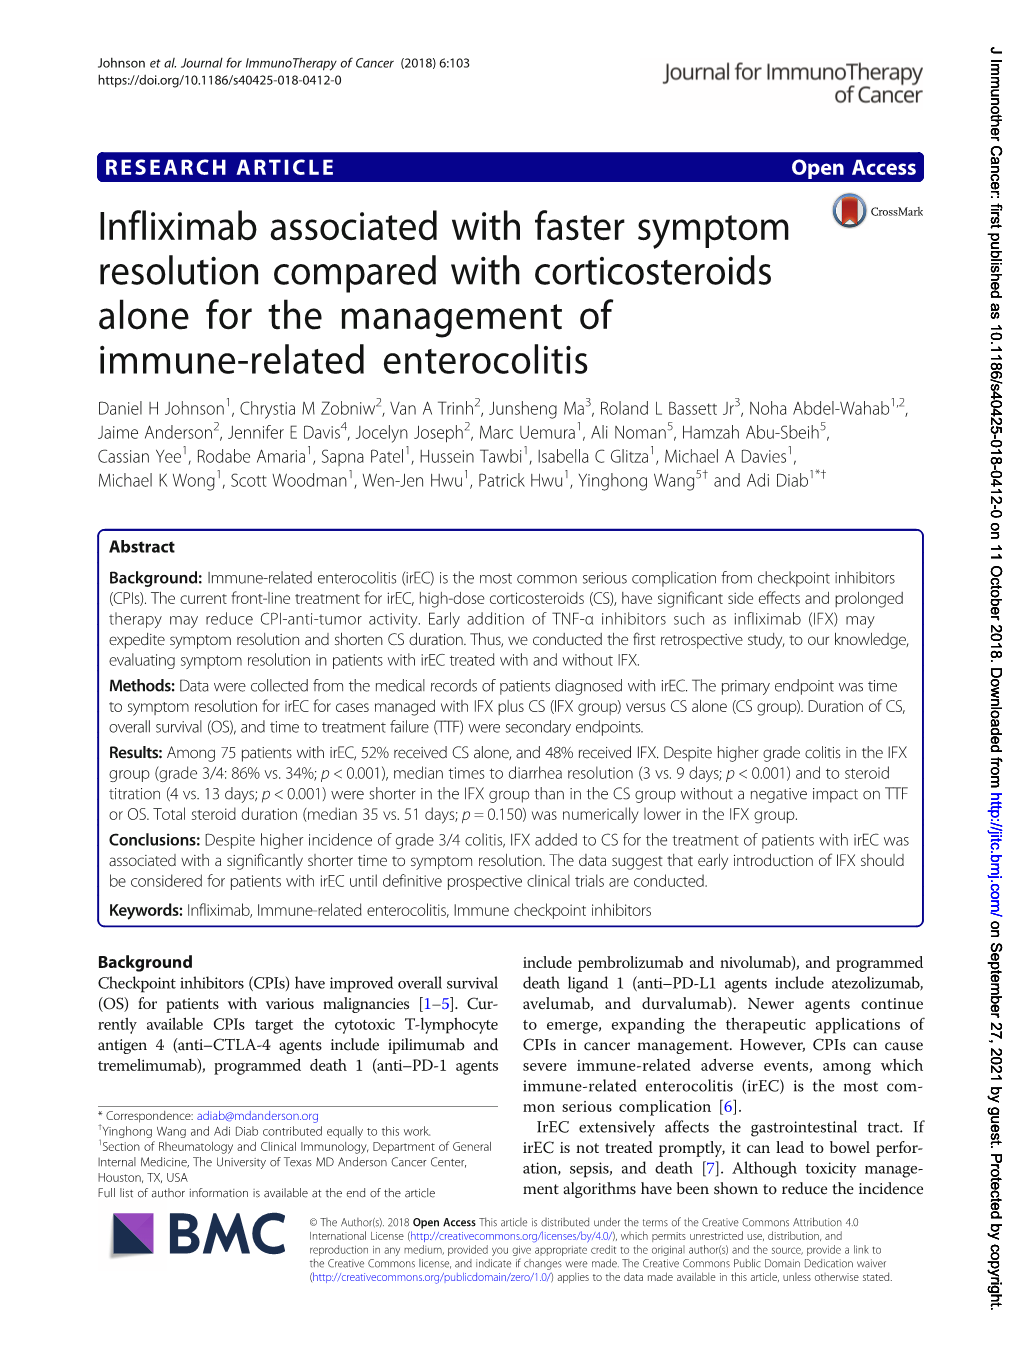 Infliximab Associated with Faster Symptom Resolution Compared with Corticosteroids Alone for the Management of Immune-Related Enterocolitis Daniel H